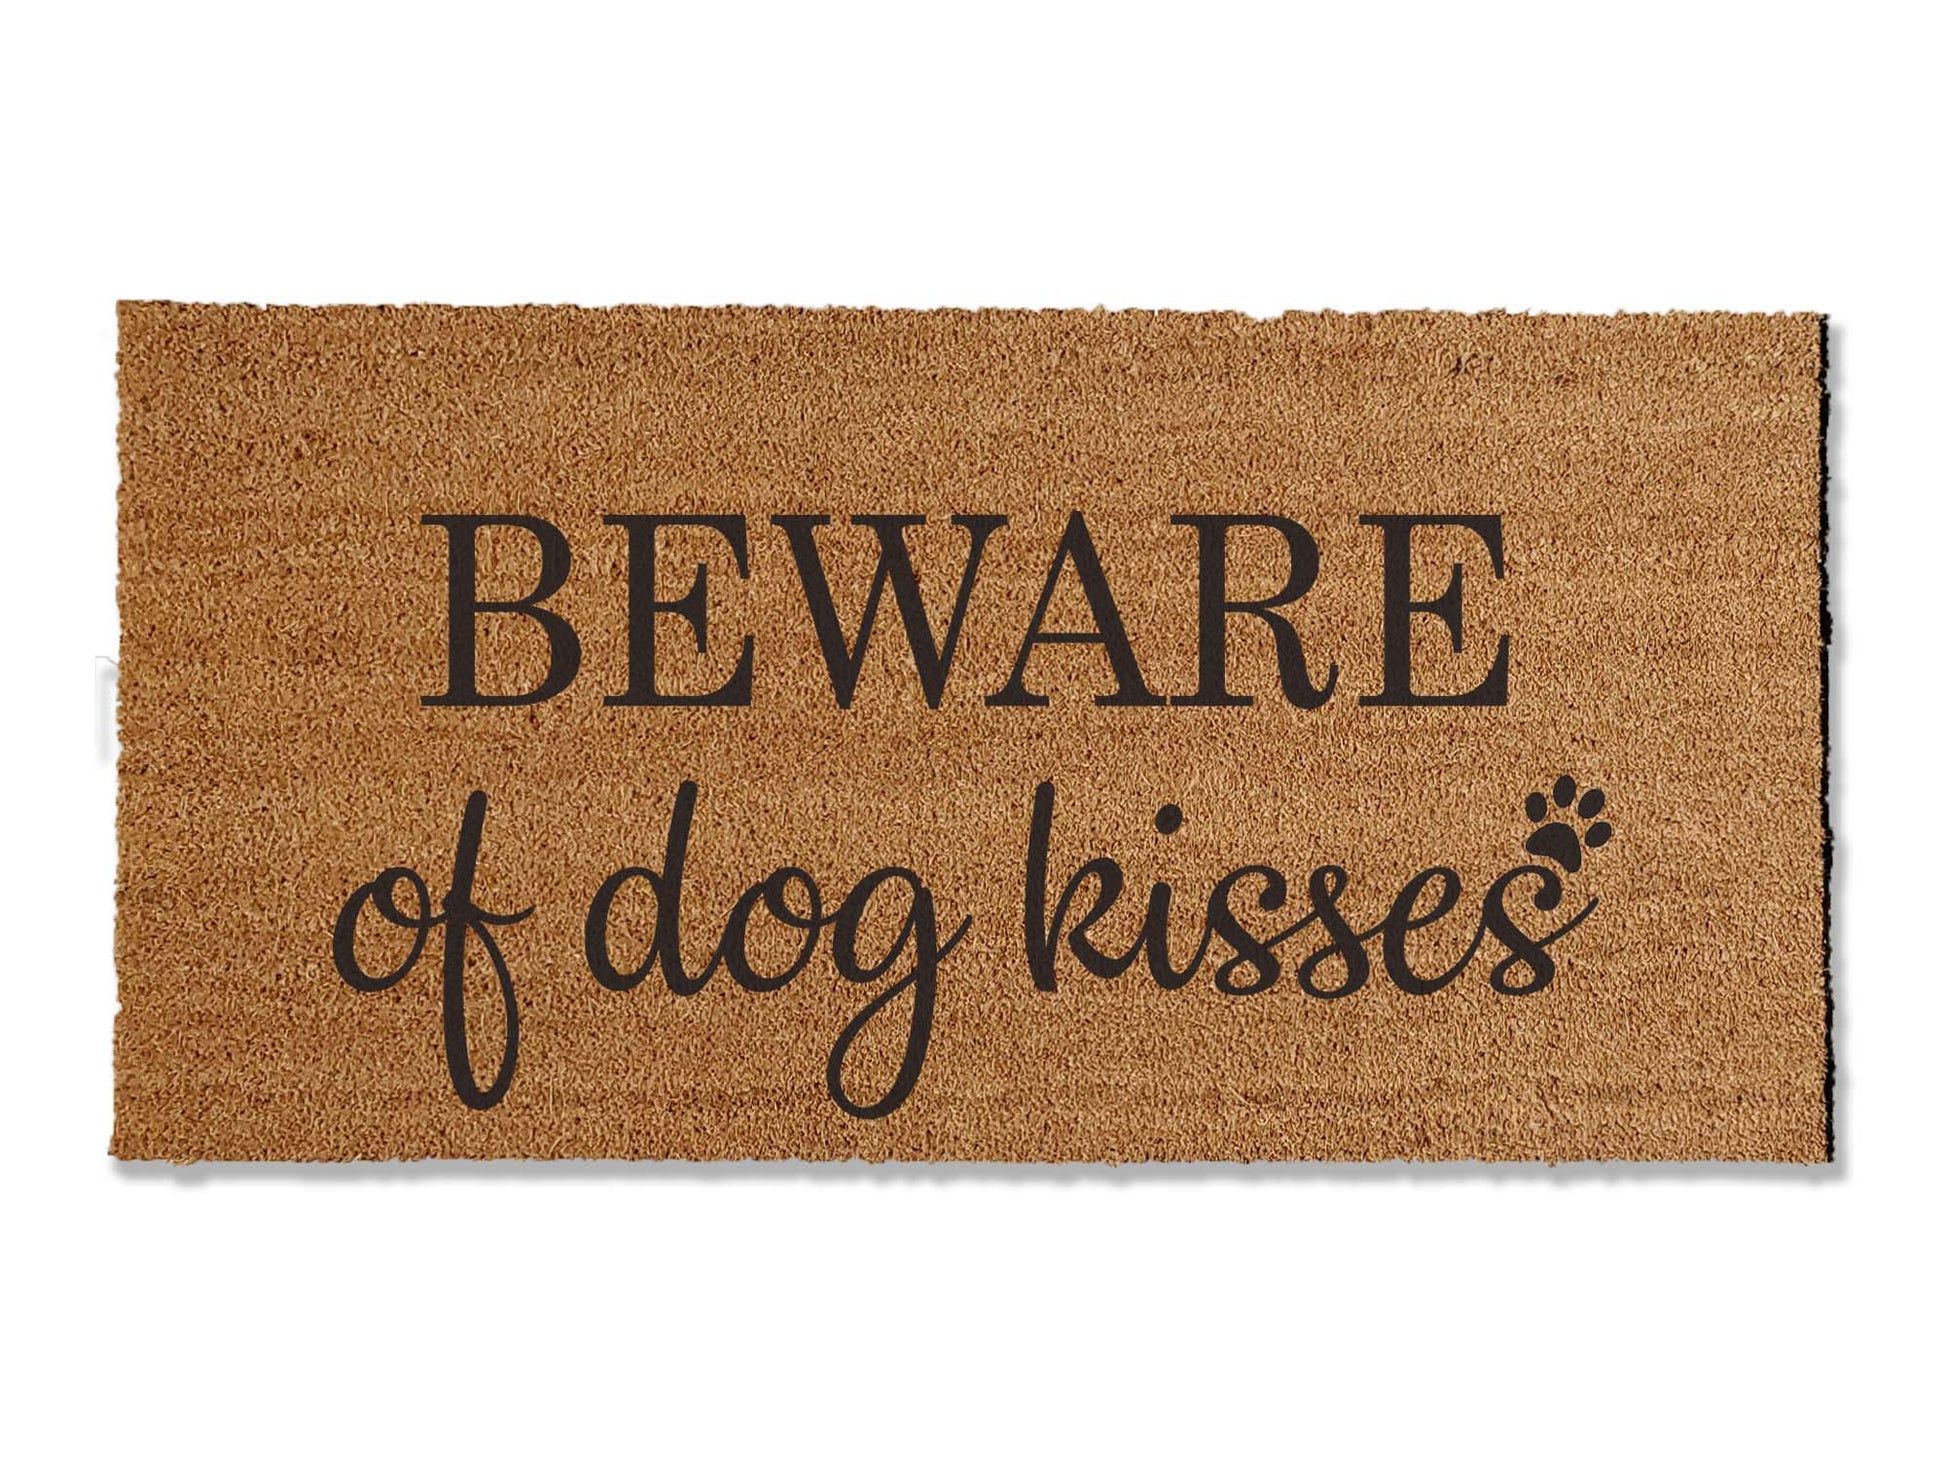 Half-inch thick coir doormat featuring a fun hearted message: 'Beware of Dog Kisses.' The mat is made of durable coir fibers, perfect for both function and charm at your entrance.